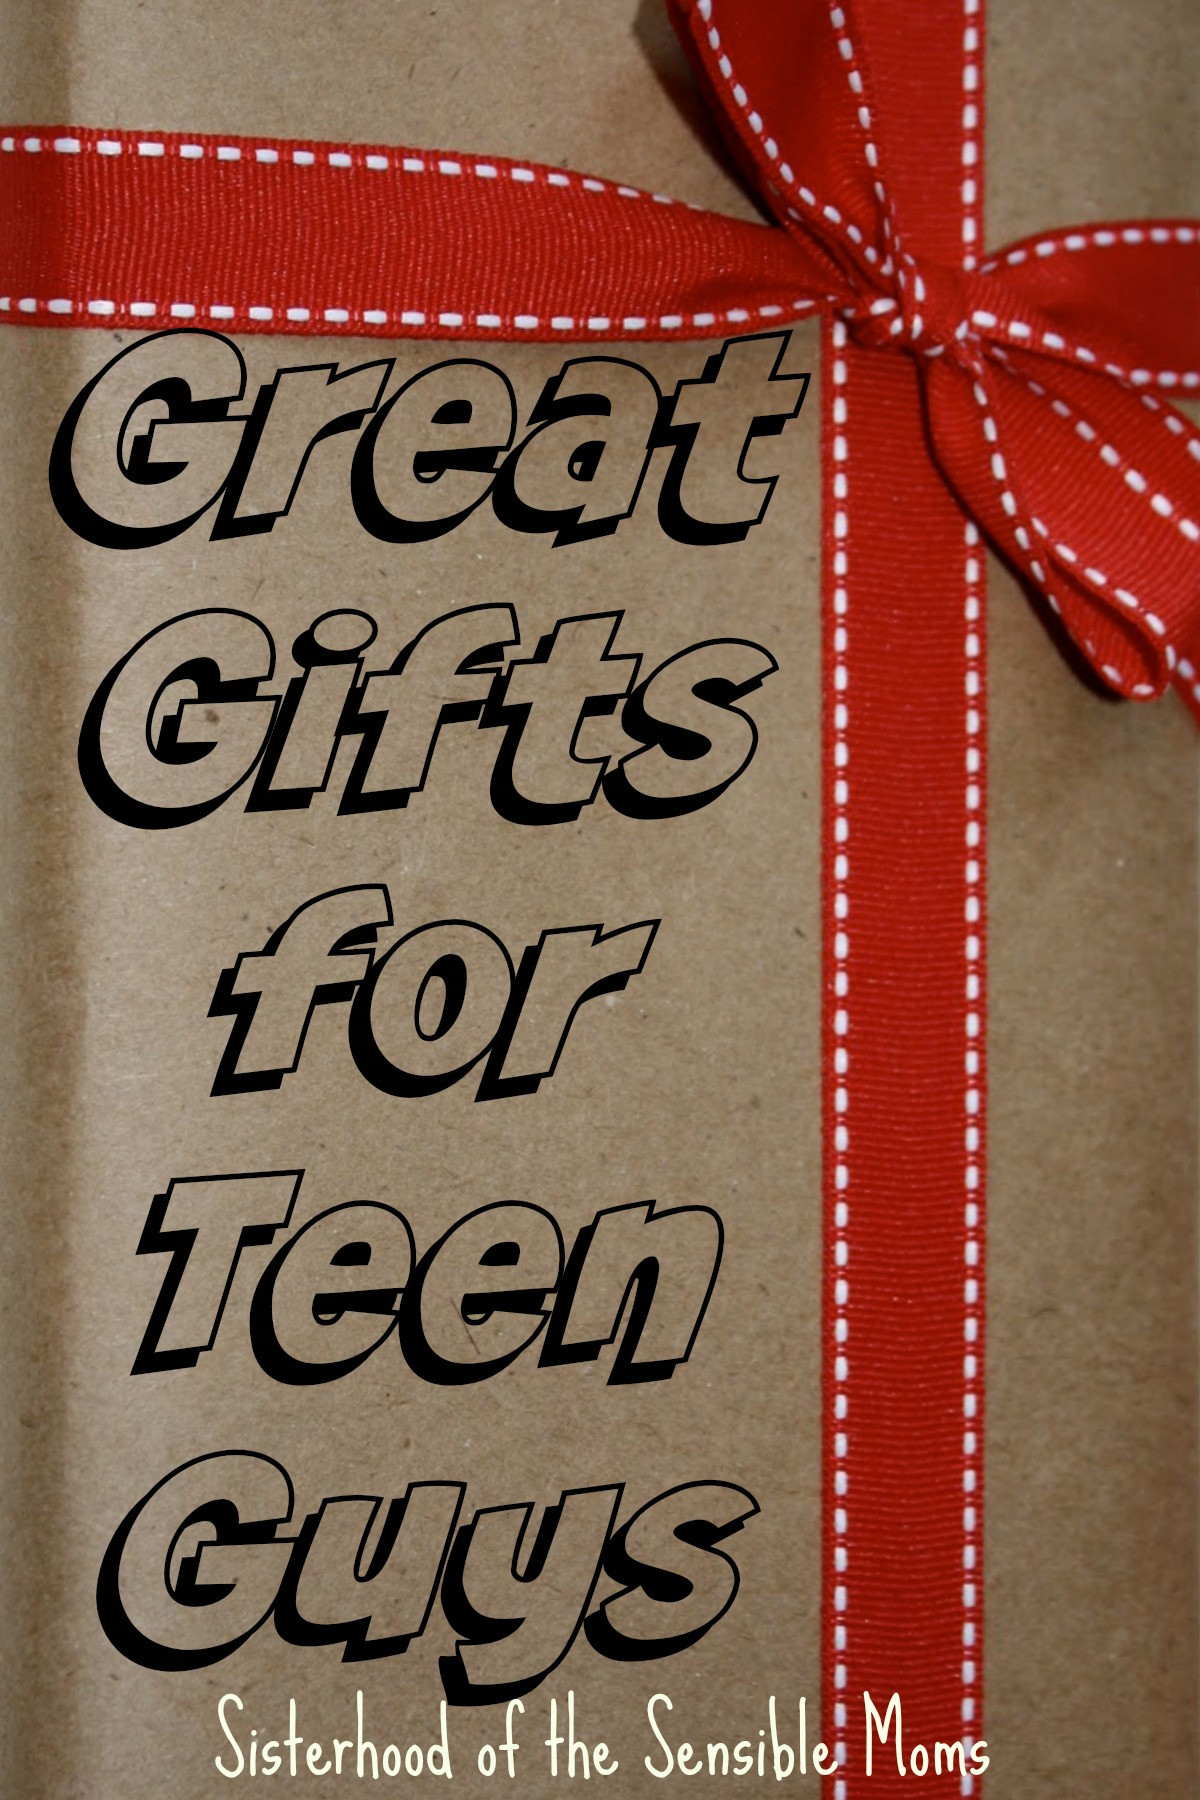 Valentines Gift Ideas For Teenage Guys
 Great Gifts for Teen Guys Sisterhood of the Sensible